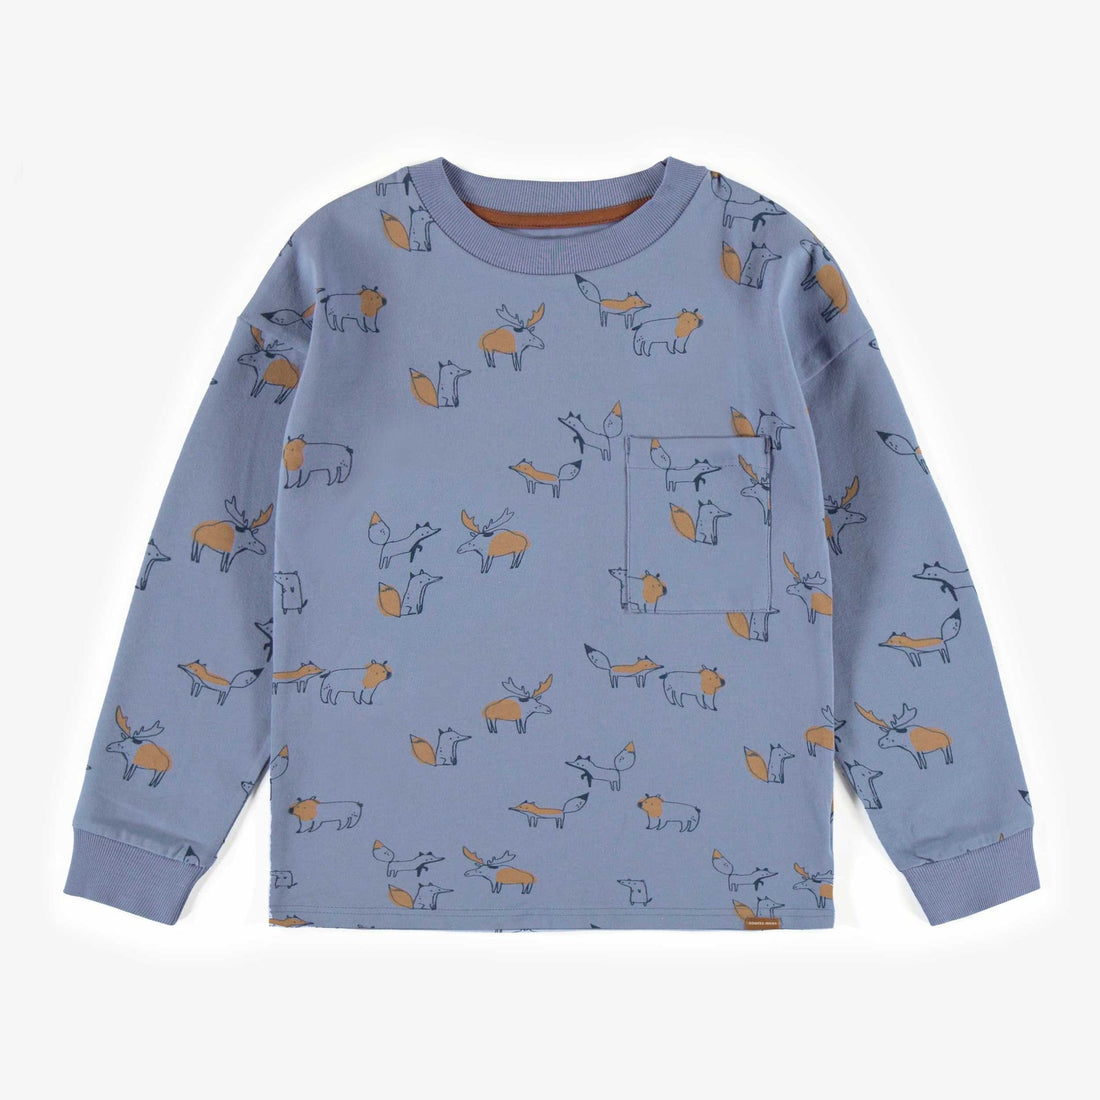 BLUE LONG-SLEEVED T-SHIRT WITH ANIMAL PATTERNS IN JERSEY, CHILD